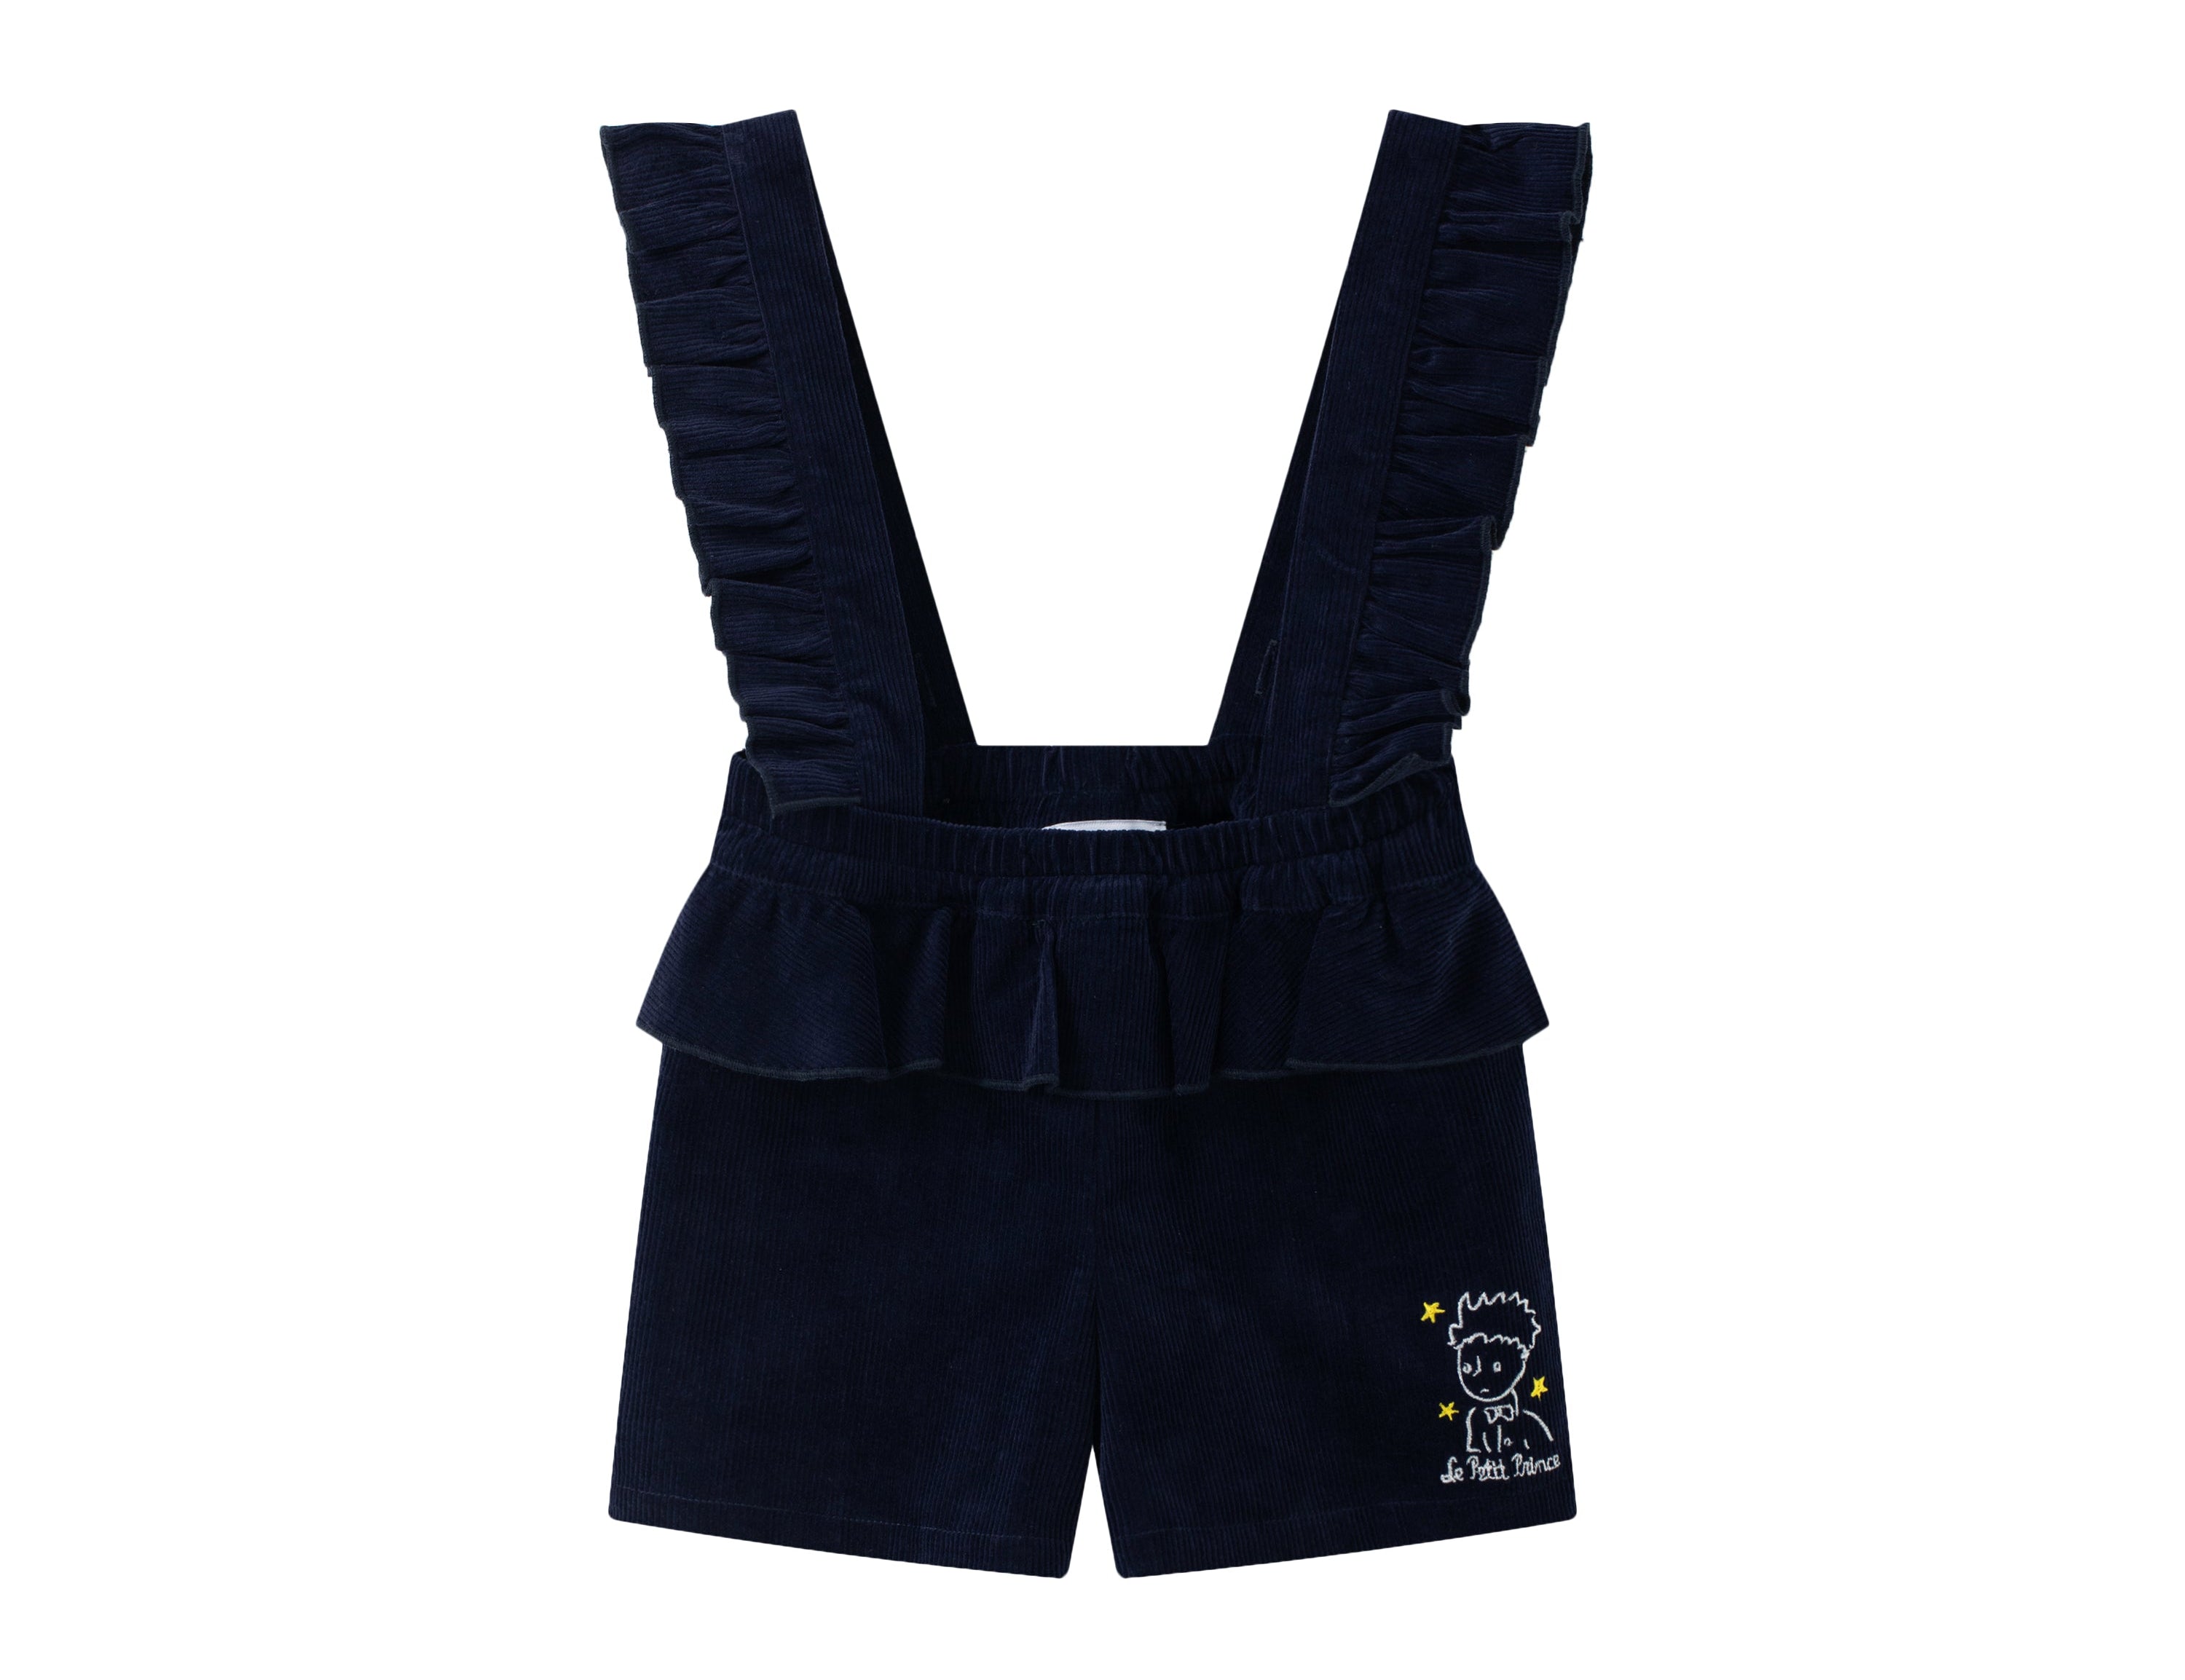 Vauva x Le Petit Prince - Girls Embroidered Corduroy Shorts product image front